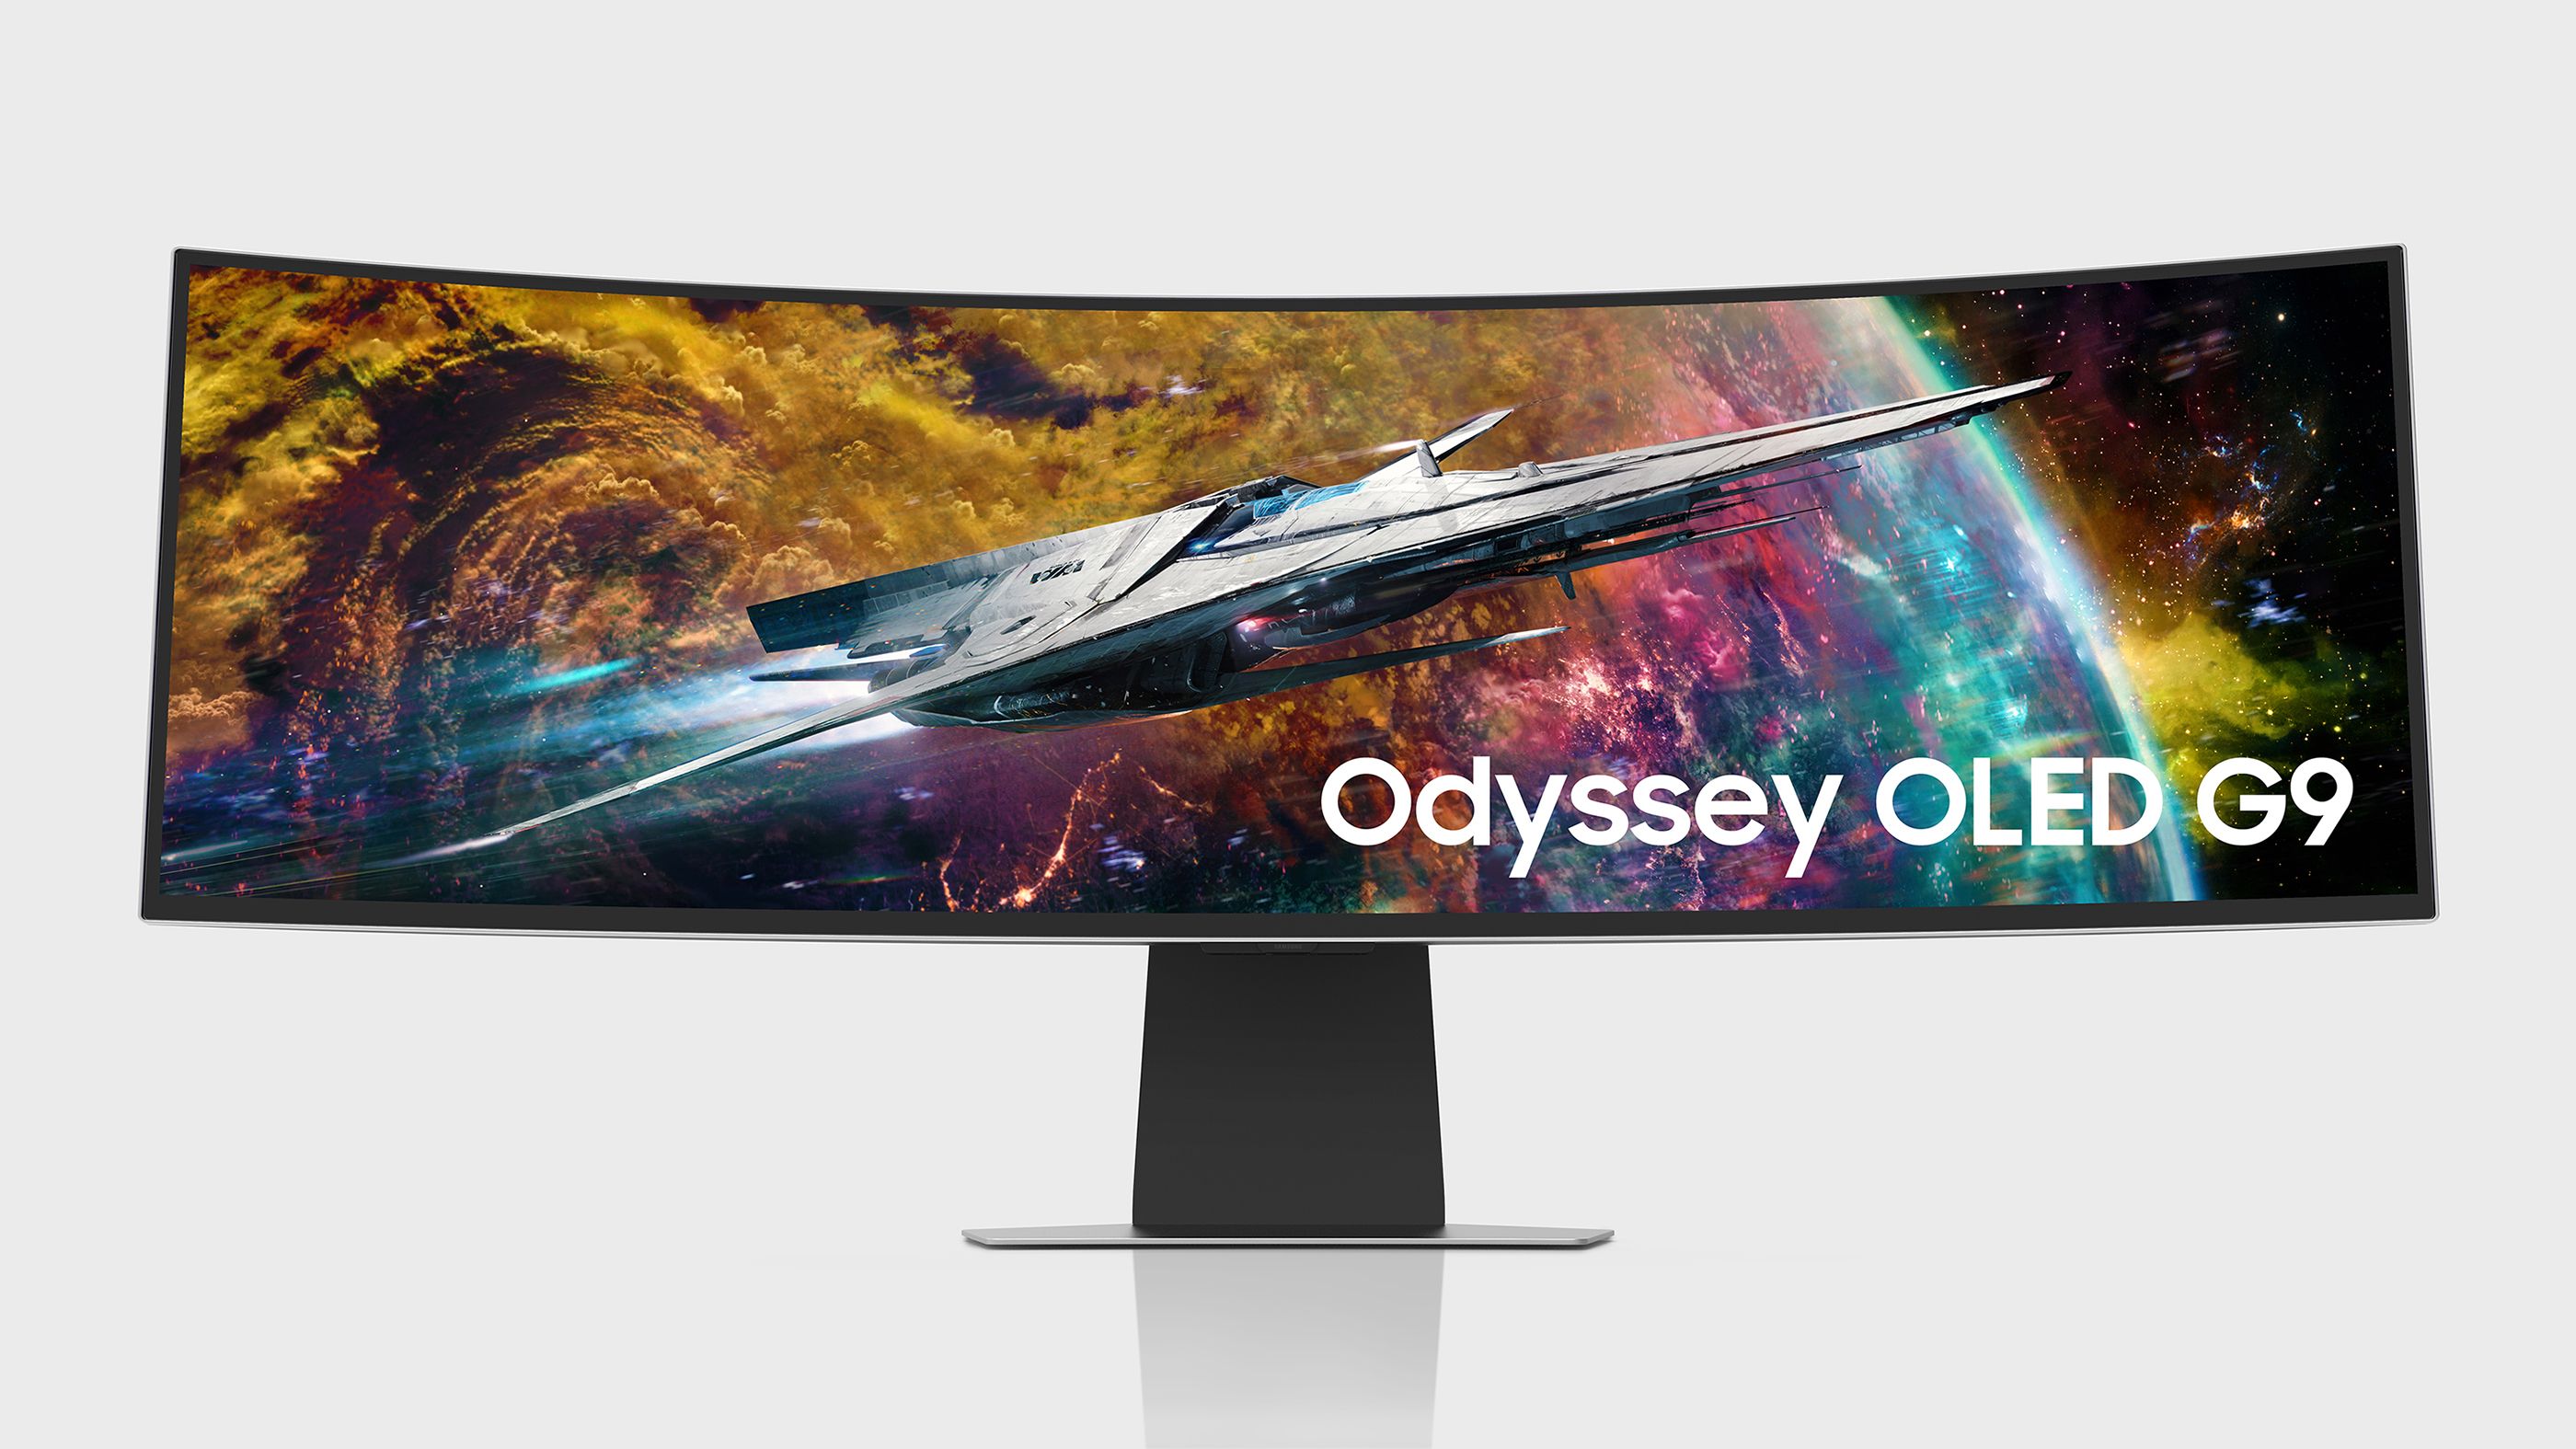 Samsung Odyssey OLED G9 front view.